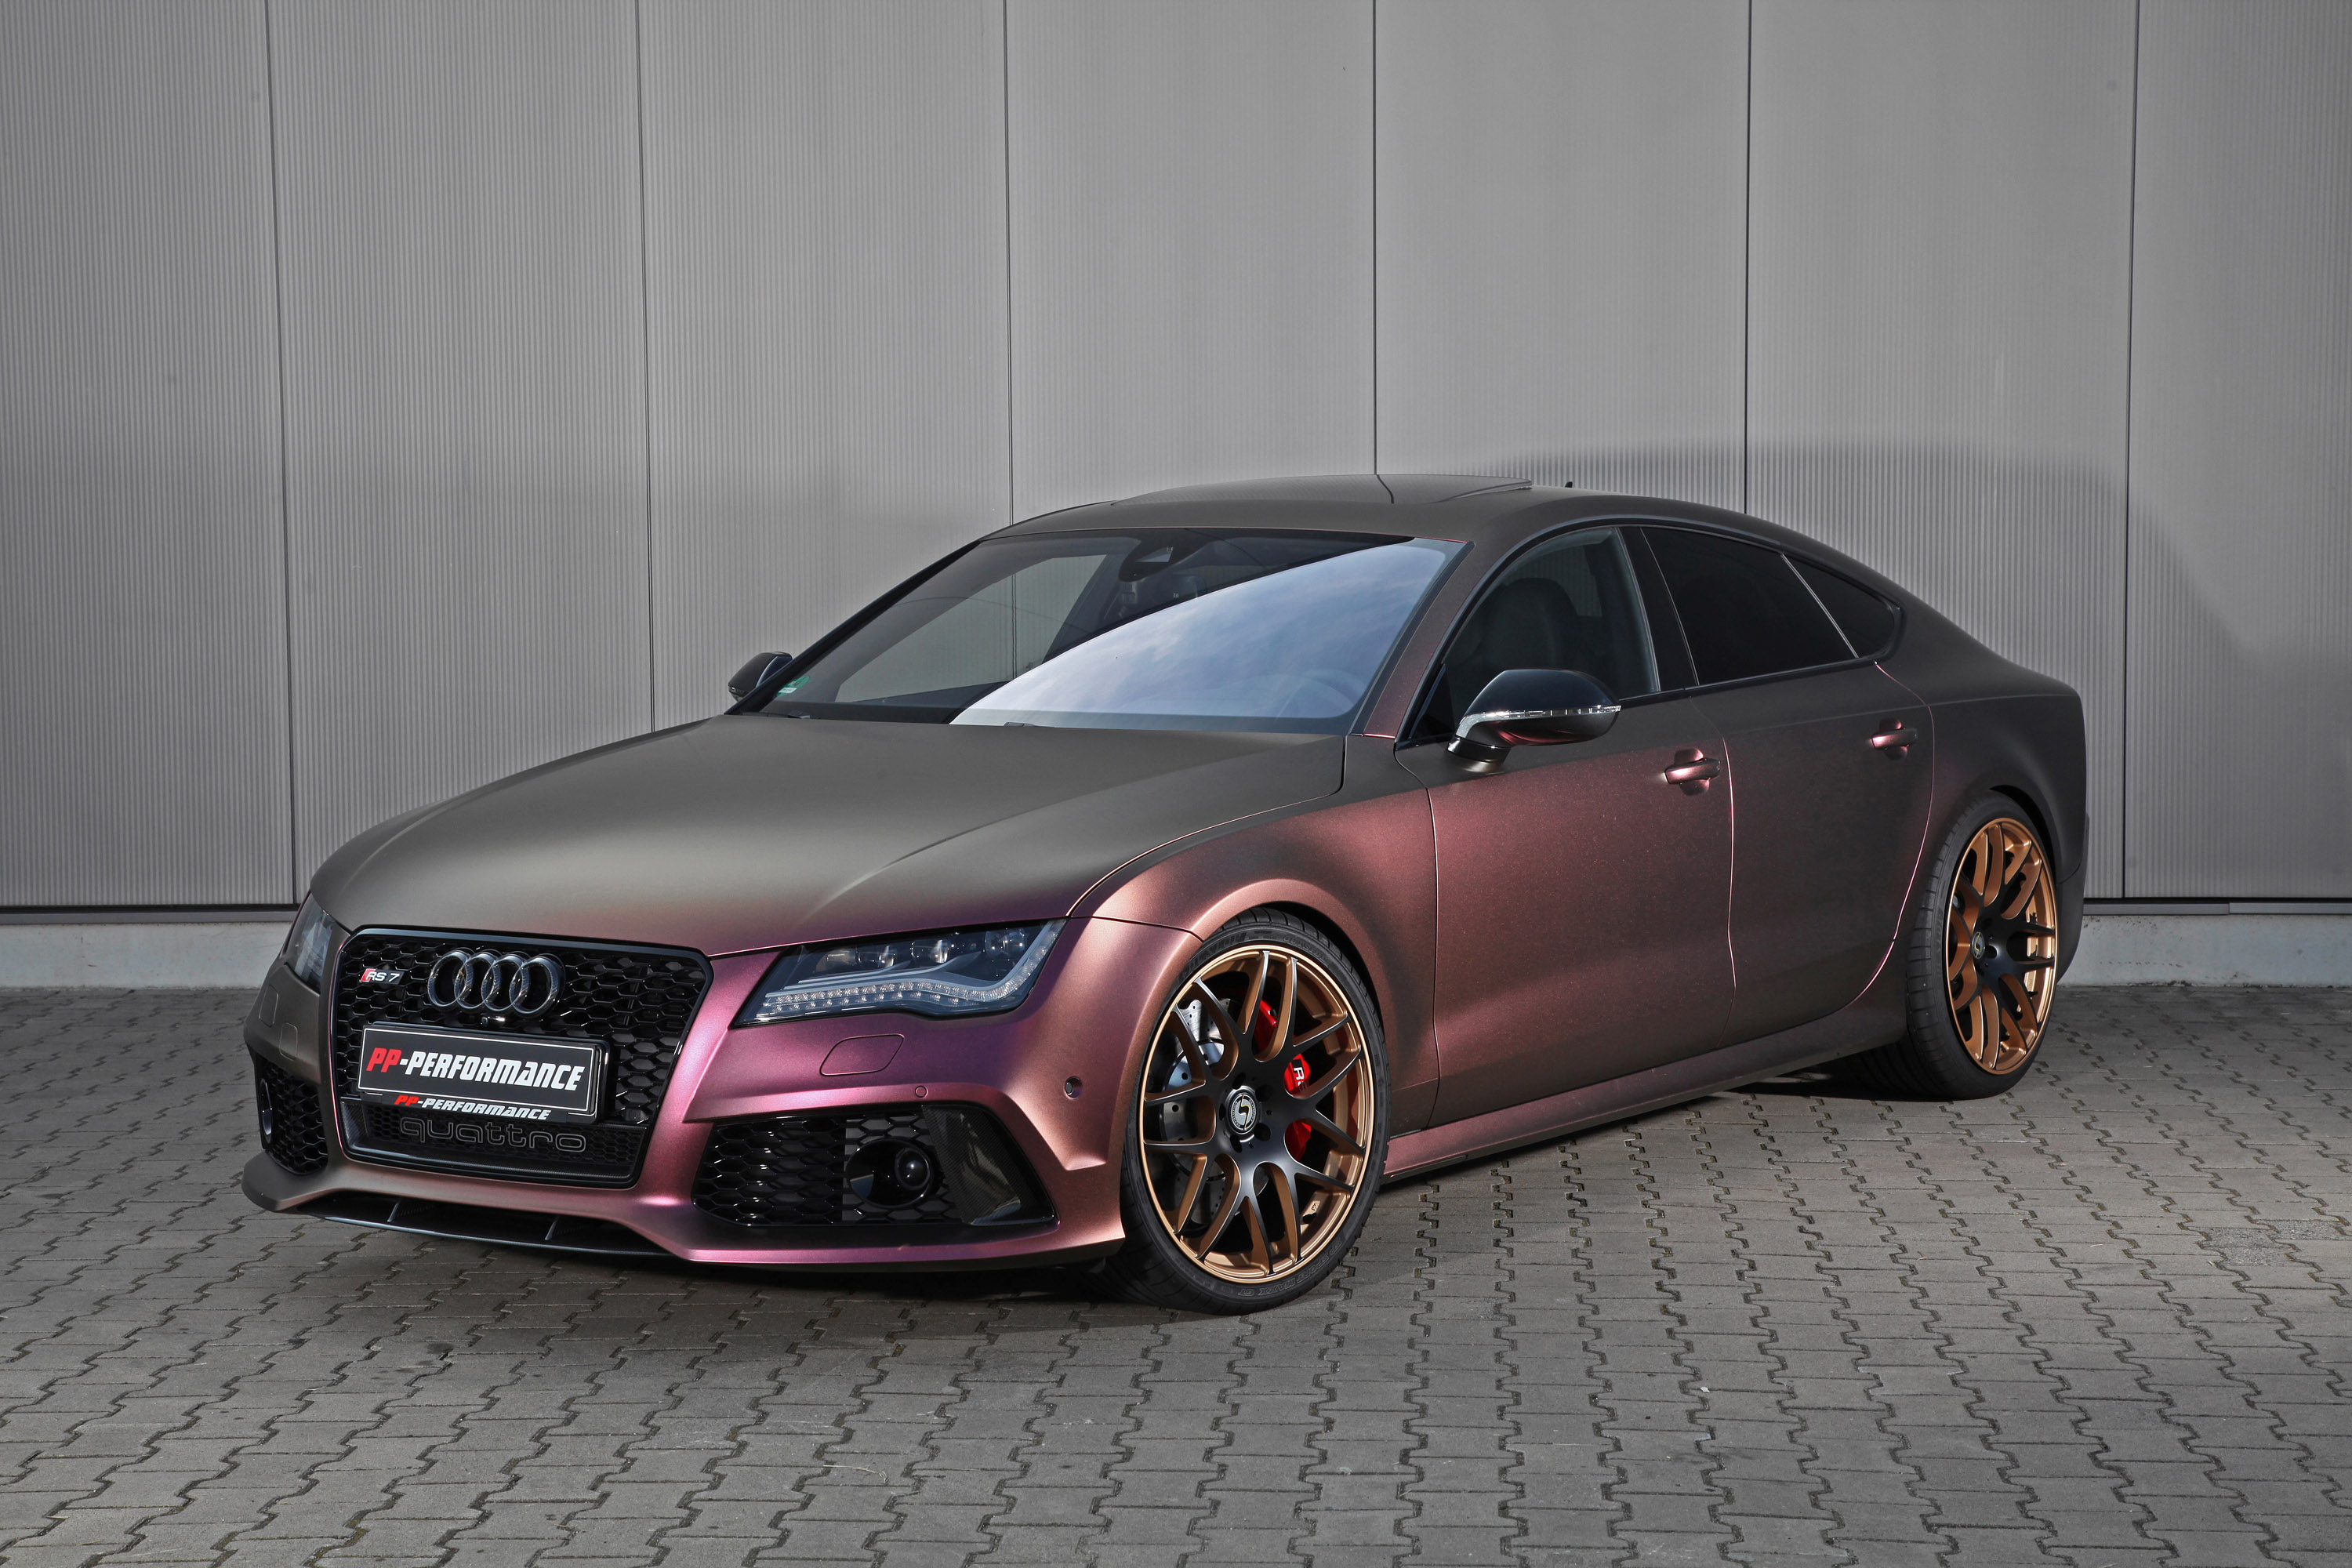 PP Performance reveals a special and redesigned Audi RS7